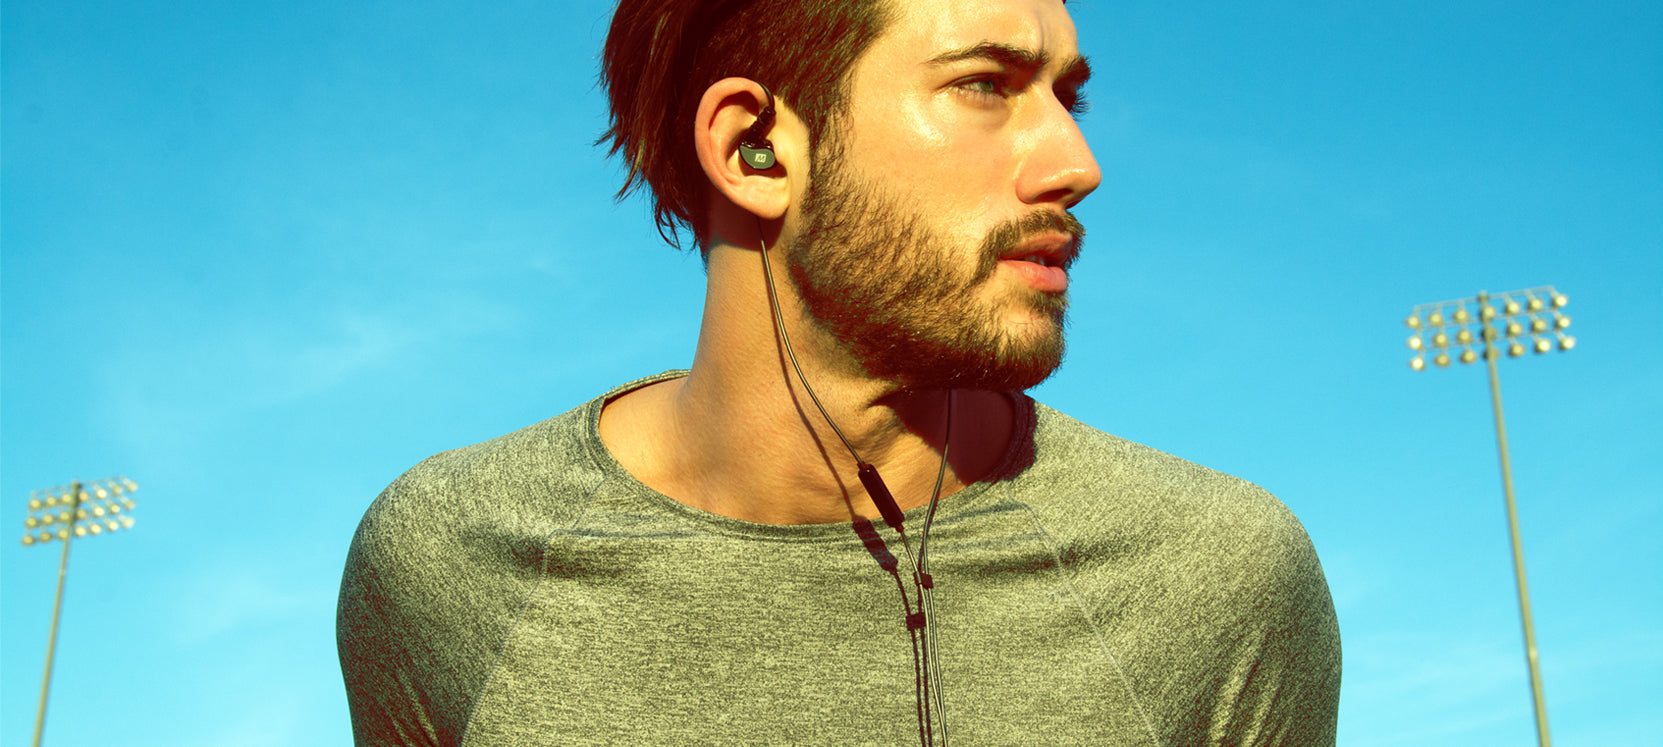 Young man with a beard, wearing earphones and a grey t-shirt, looks to the side under a bright blue sky with stadium lights in the background.